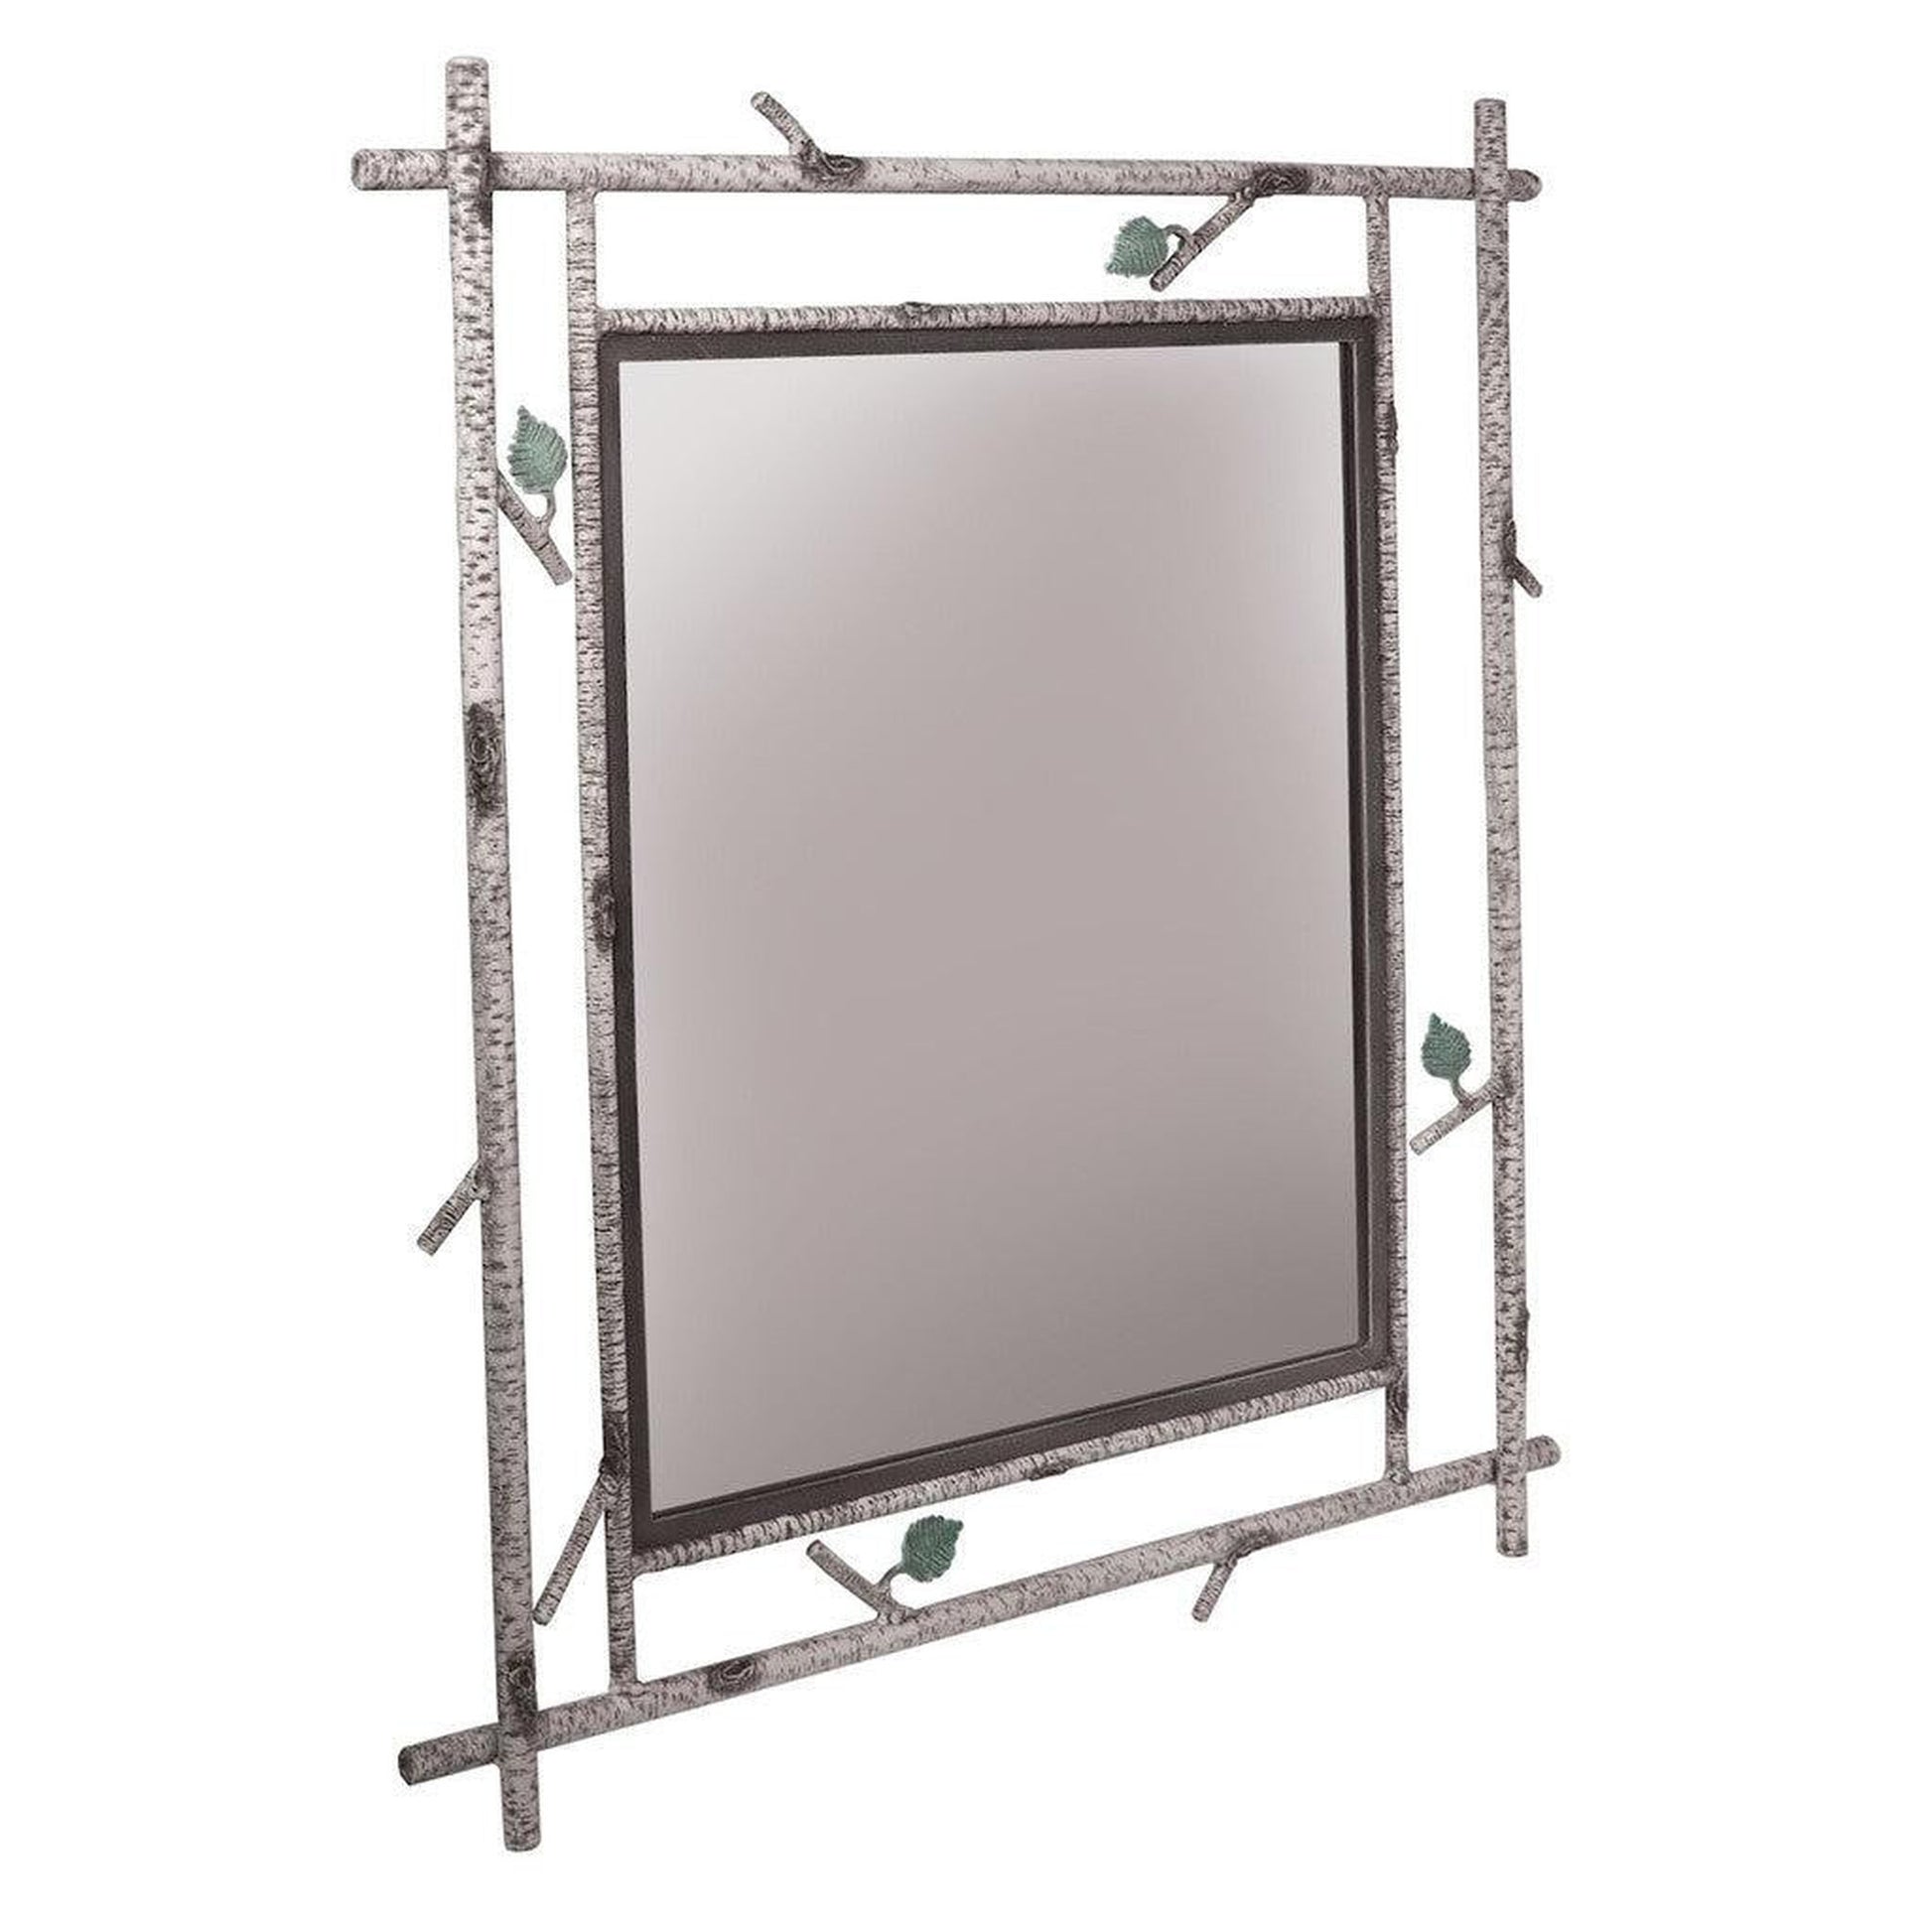 Stone County Ironworks Whisper Creek 35" x 47" Large Natural Black Iron Wall Mirror With Copper Iron Accent